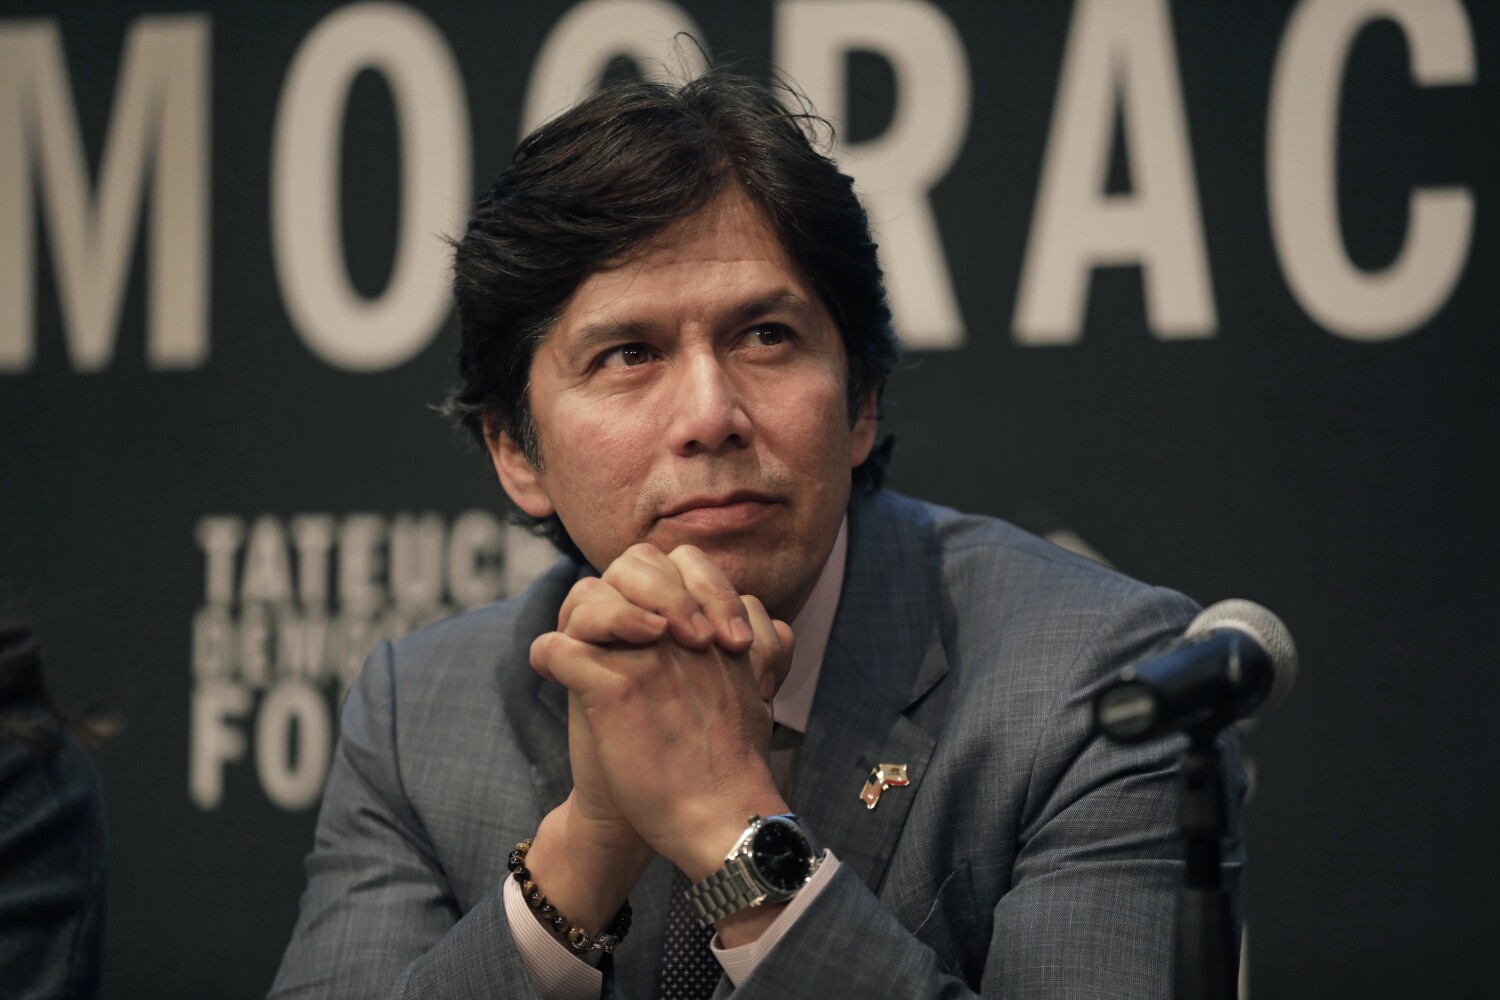 Another L.A. recall effort has sprung up. This one targets Councilman Kevin de León